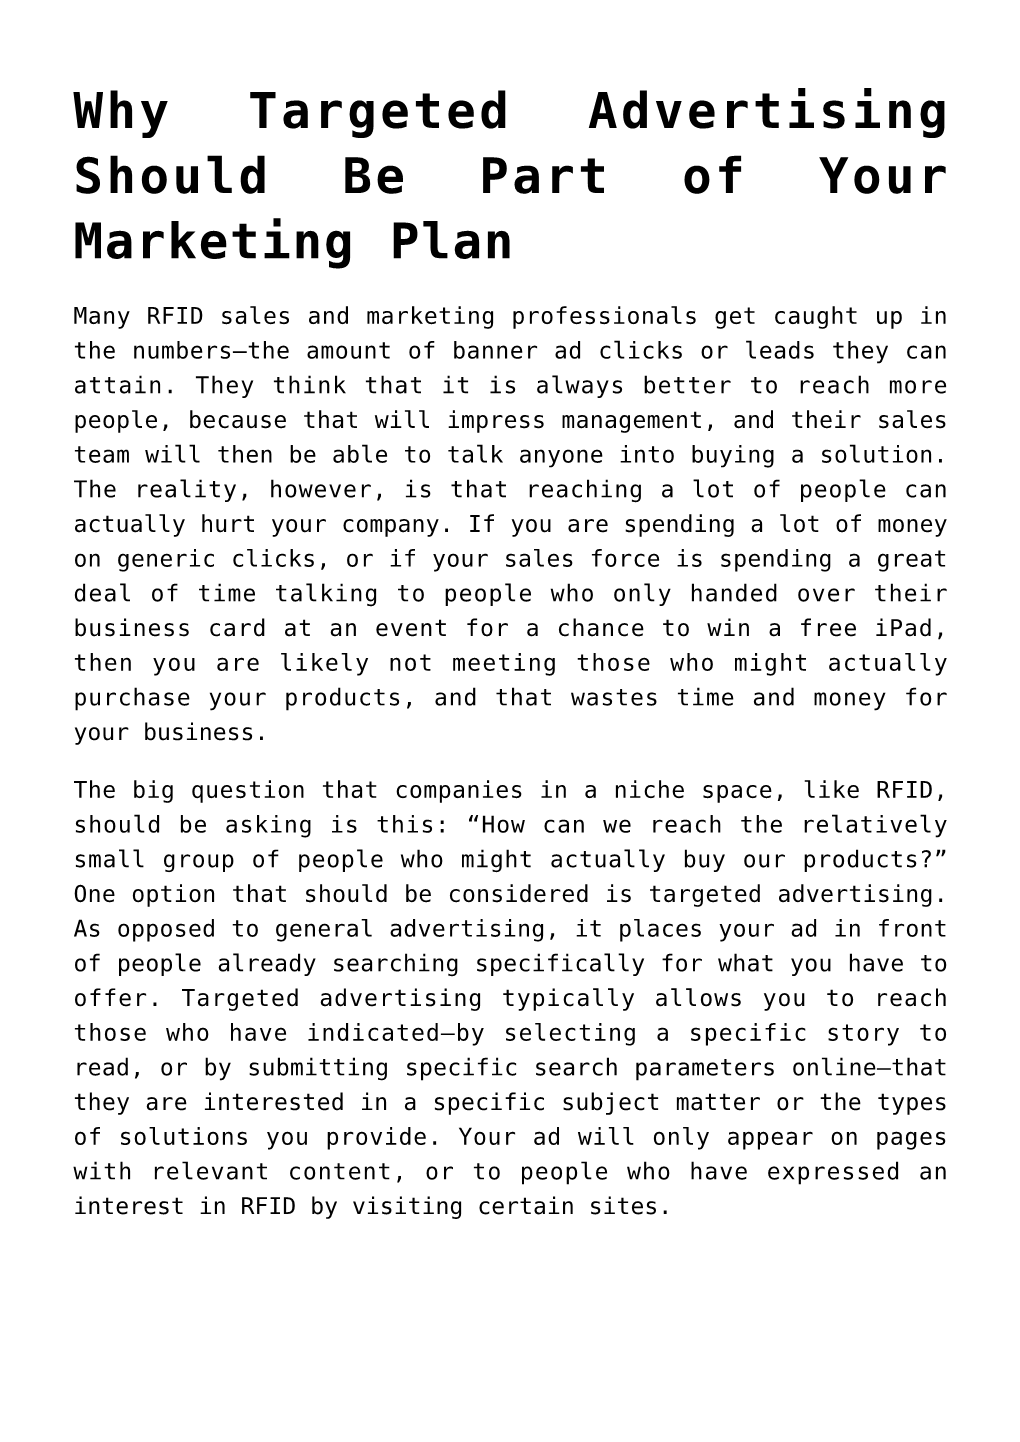 Why Targeted Advertising Should Be Part of Your Marketing Plan